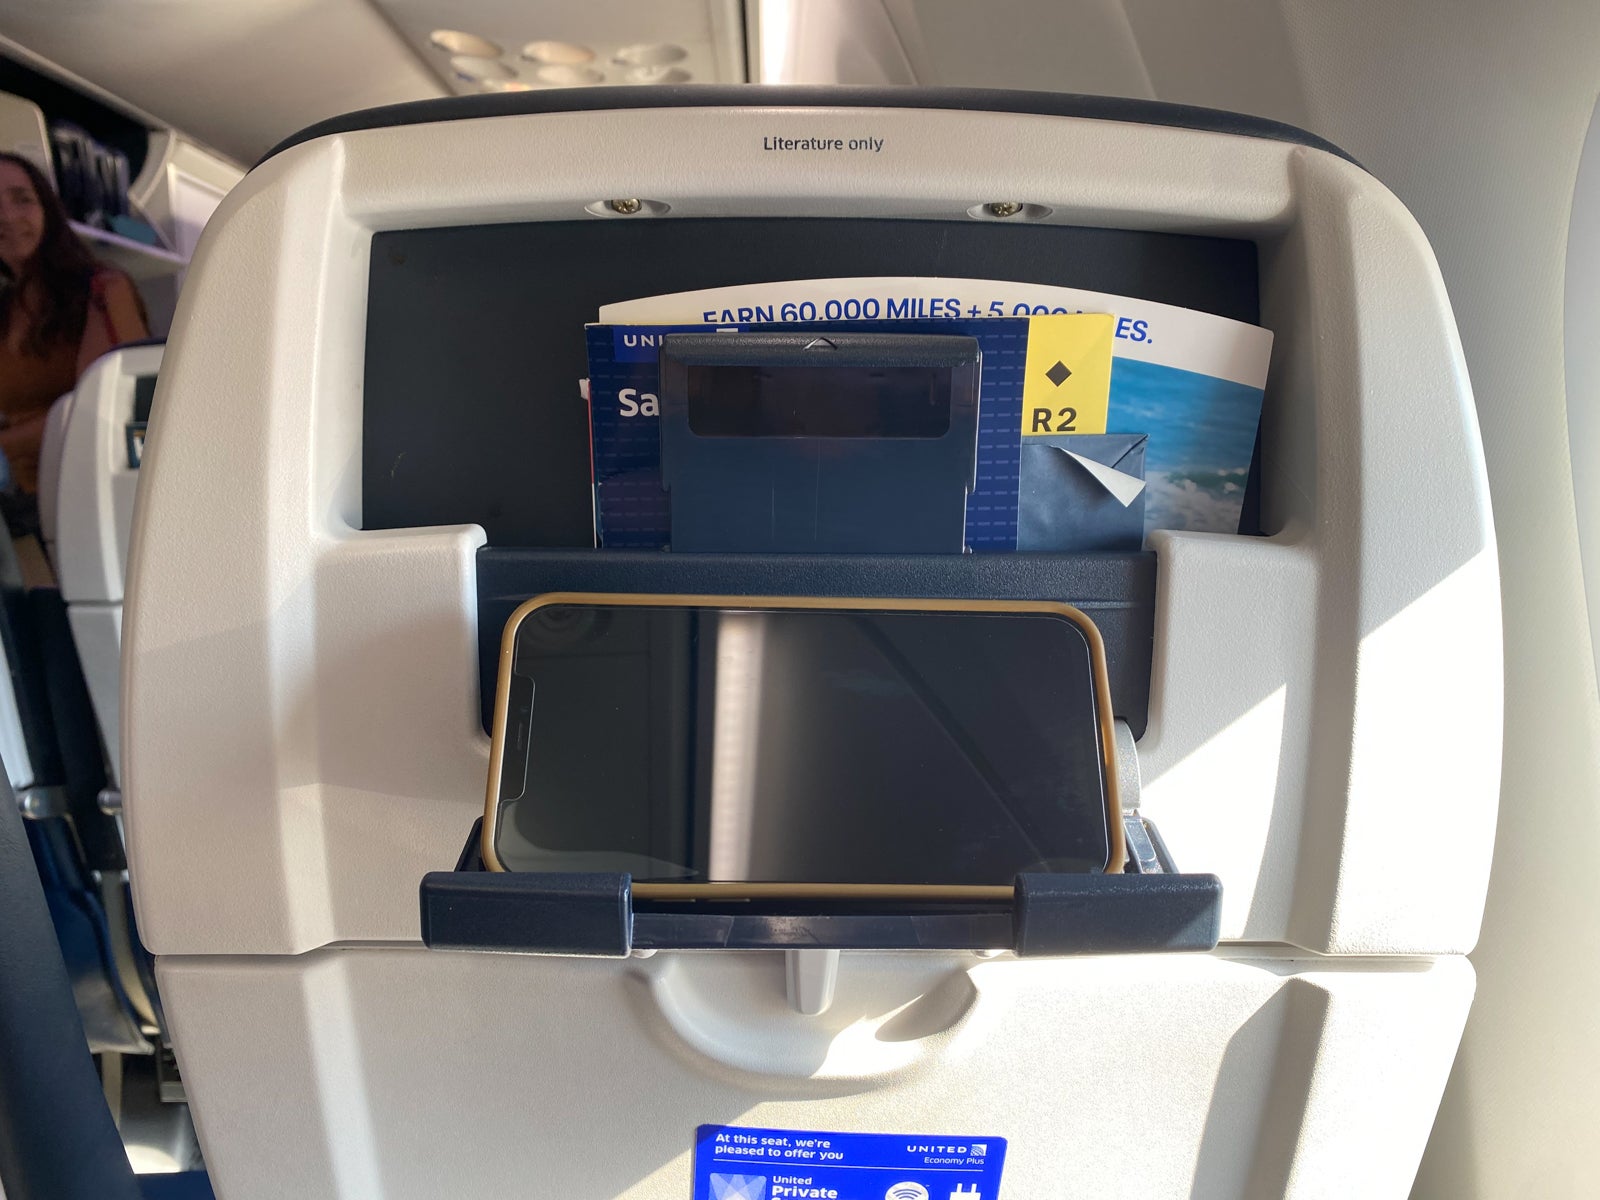 United personal device holder Boeing 737 MAX 9